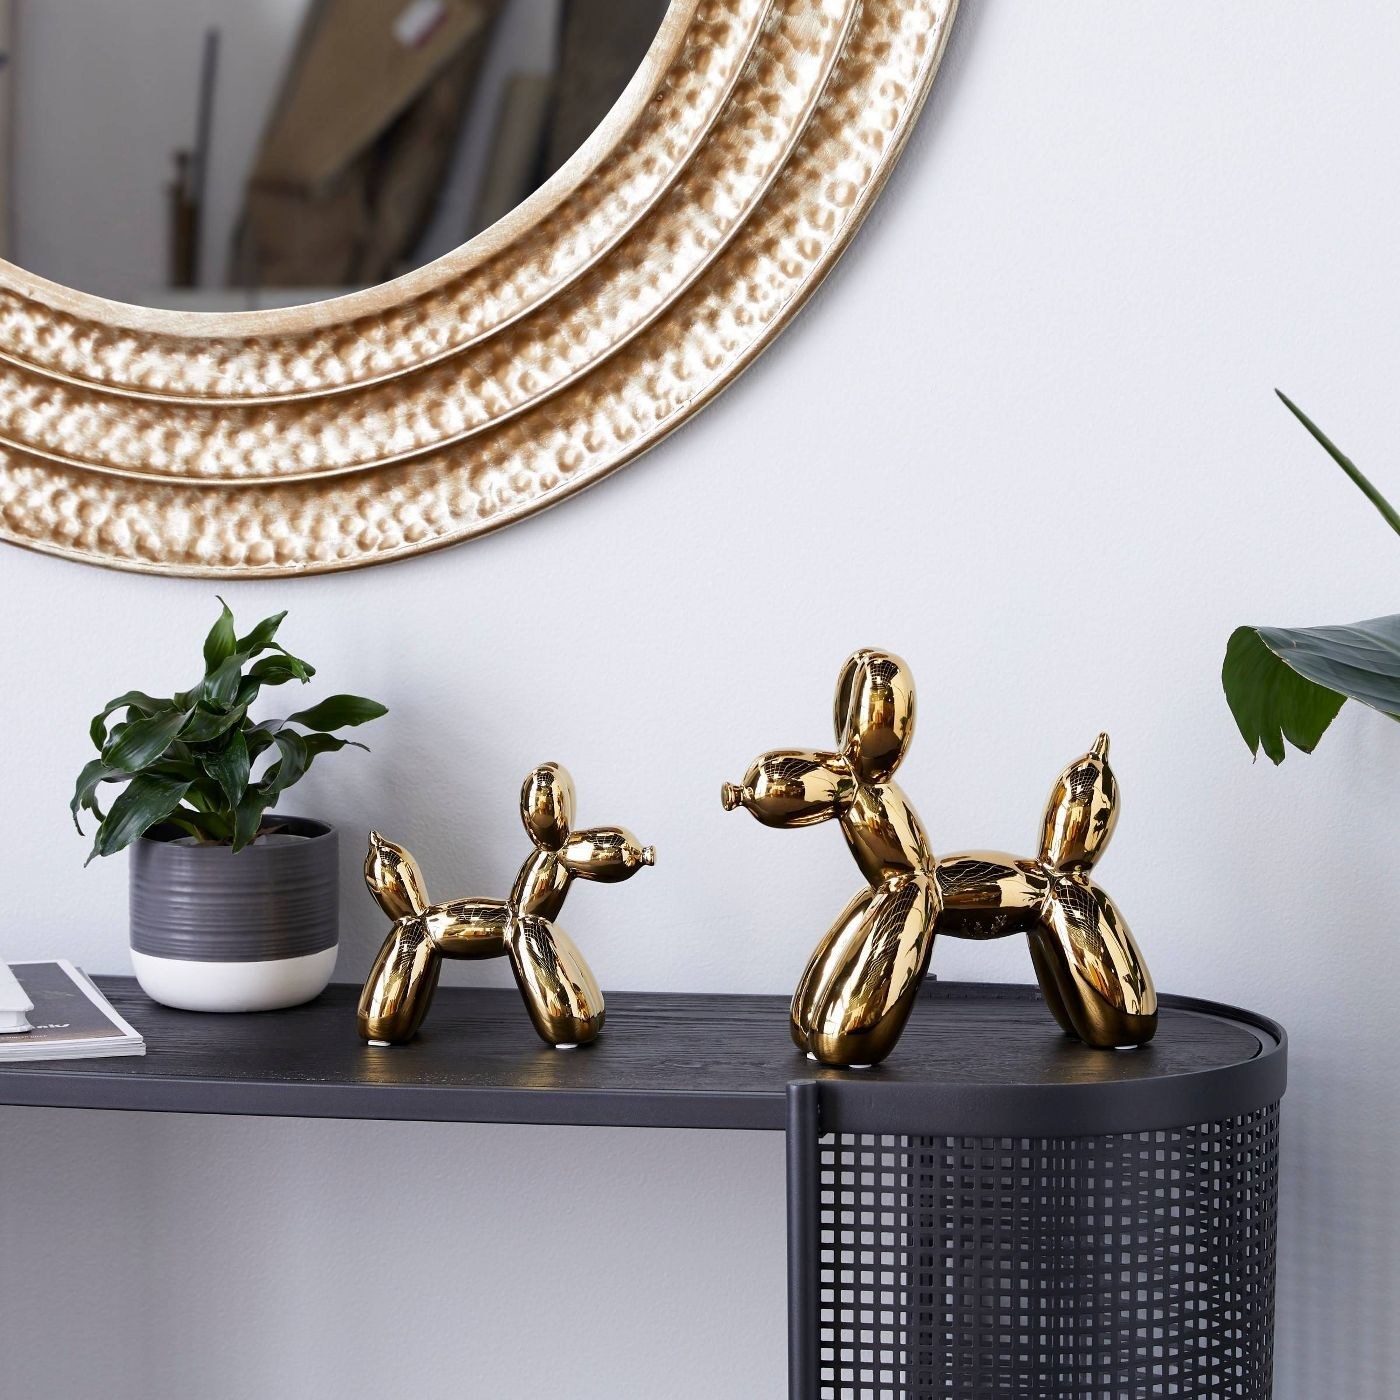 A set of gold balloon dogs on a black table